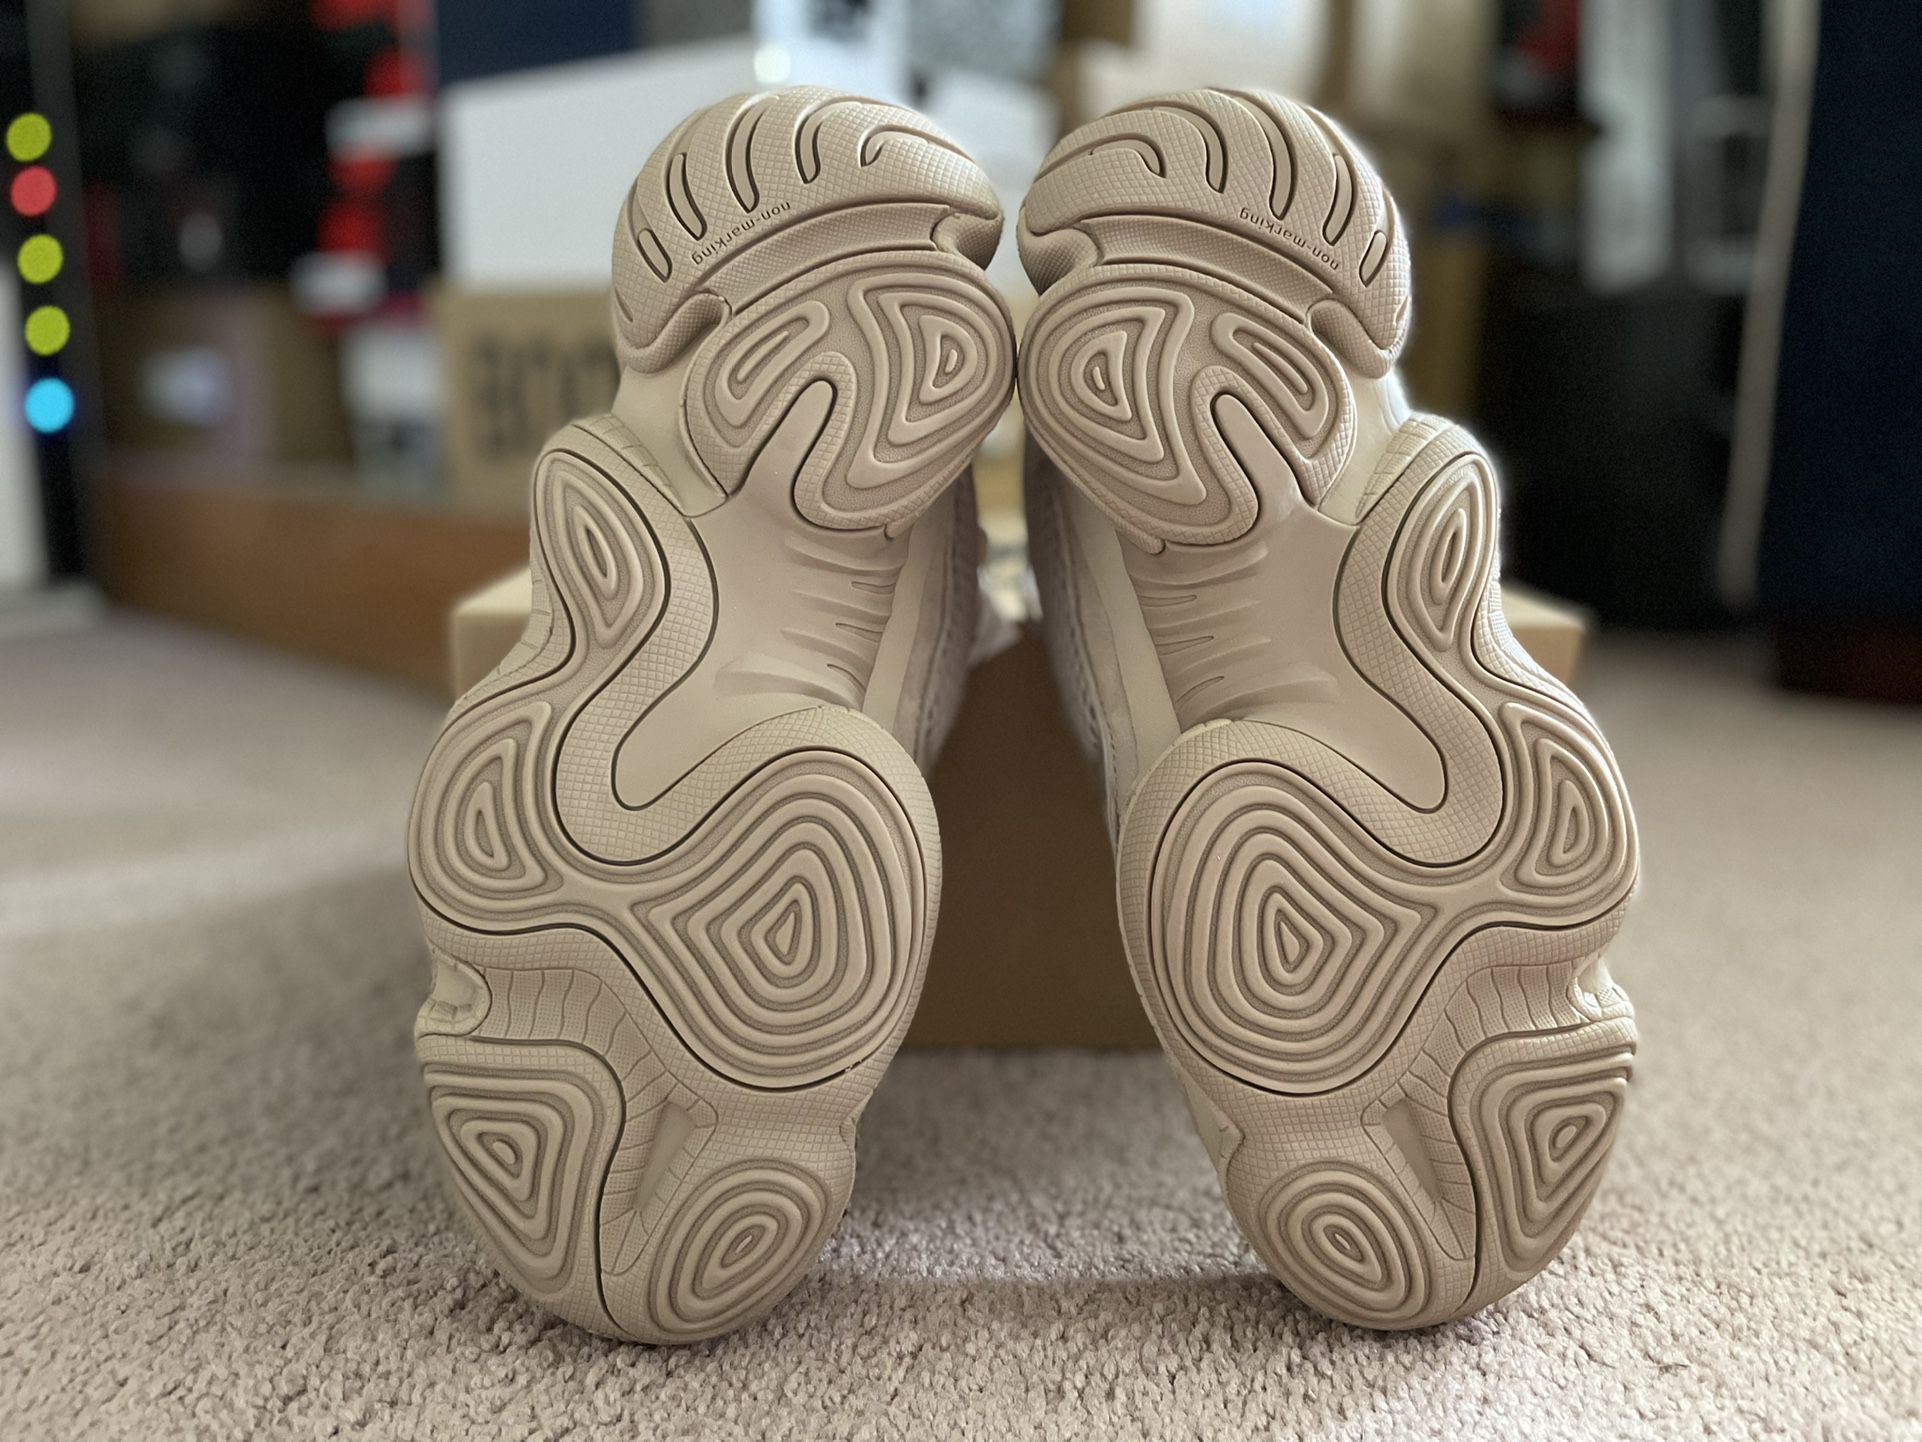 Adidas Yeezy 500 Taupe Light 6.5 9.5 Supreme Bred Chicago Foam Runner Sand  Shadow Jordan 1 Dunk Sb for Sale in San Mateo, CA - OfferUp